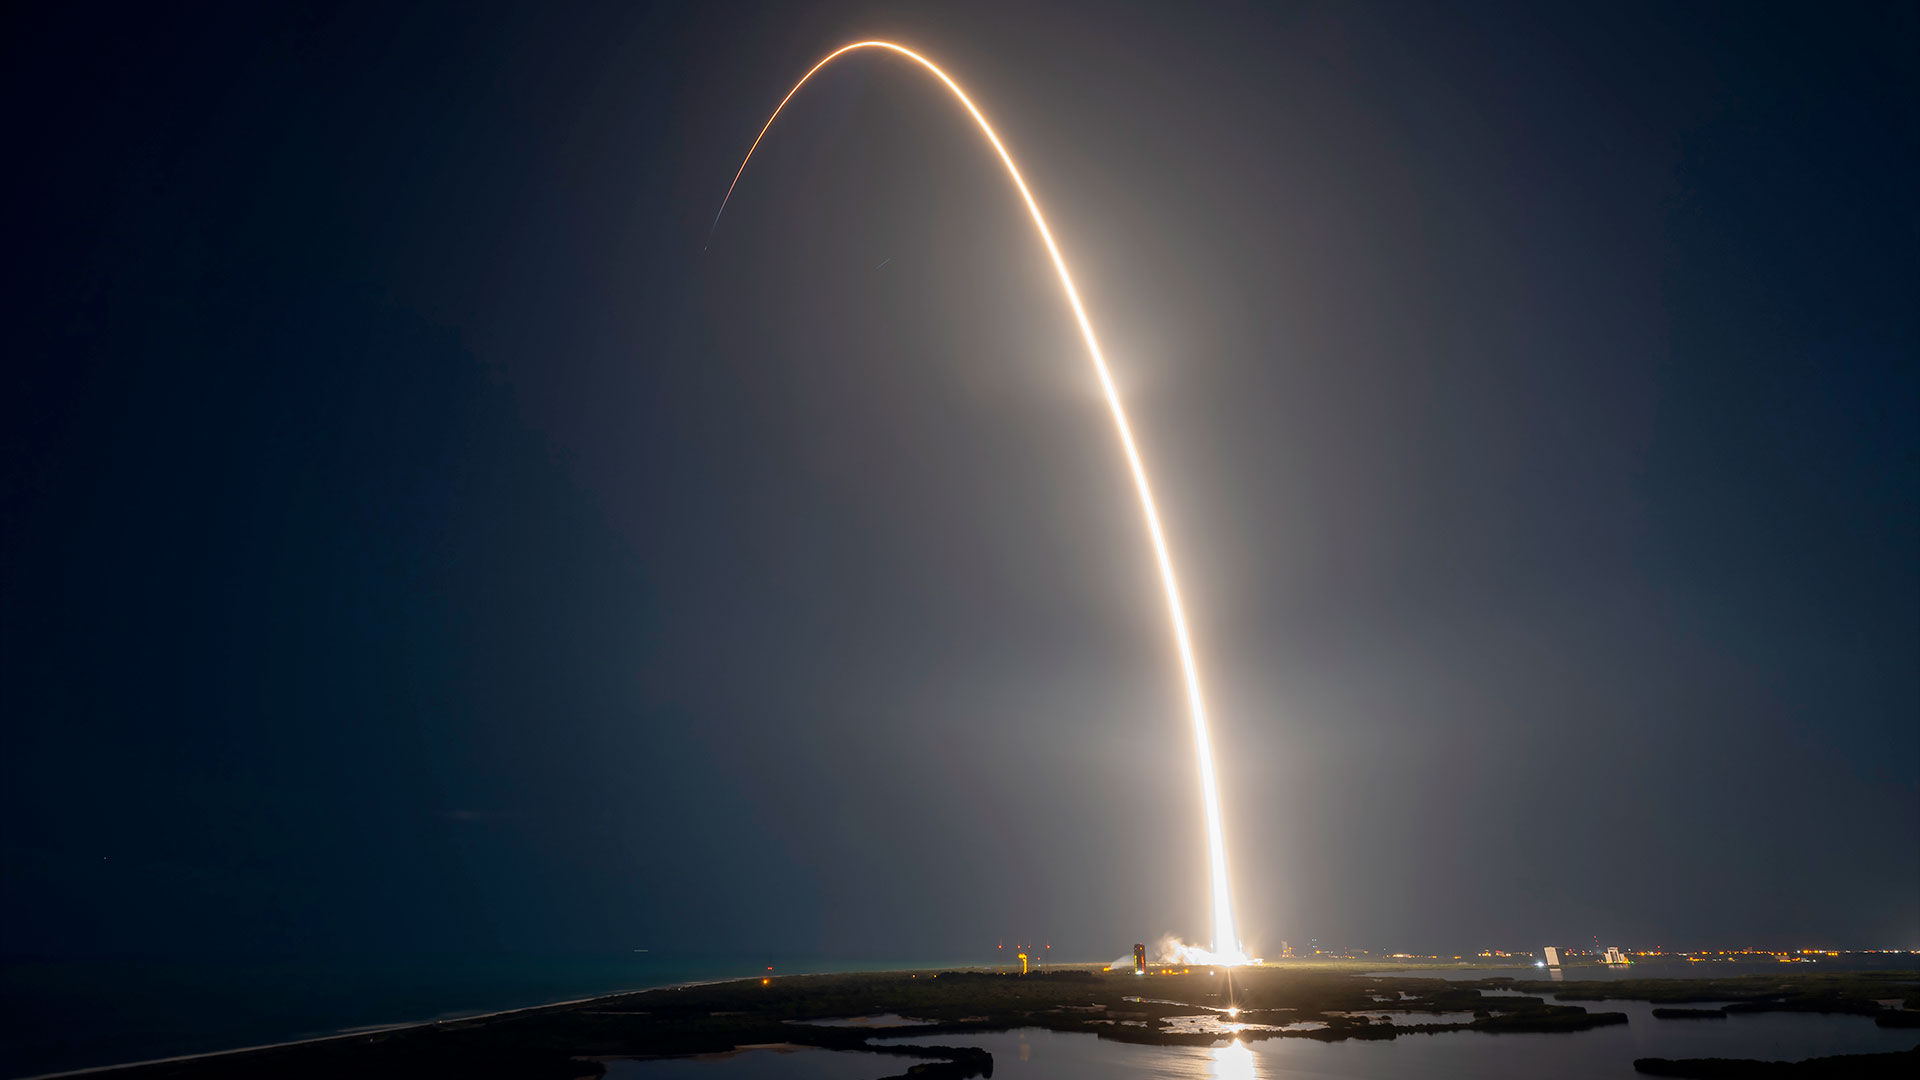 SpaceX Falcon 9 rocket launching Starlink satellites on record 21st flight tonight